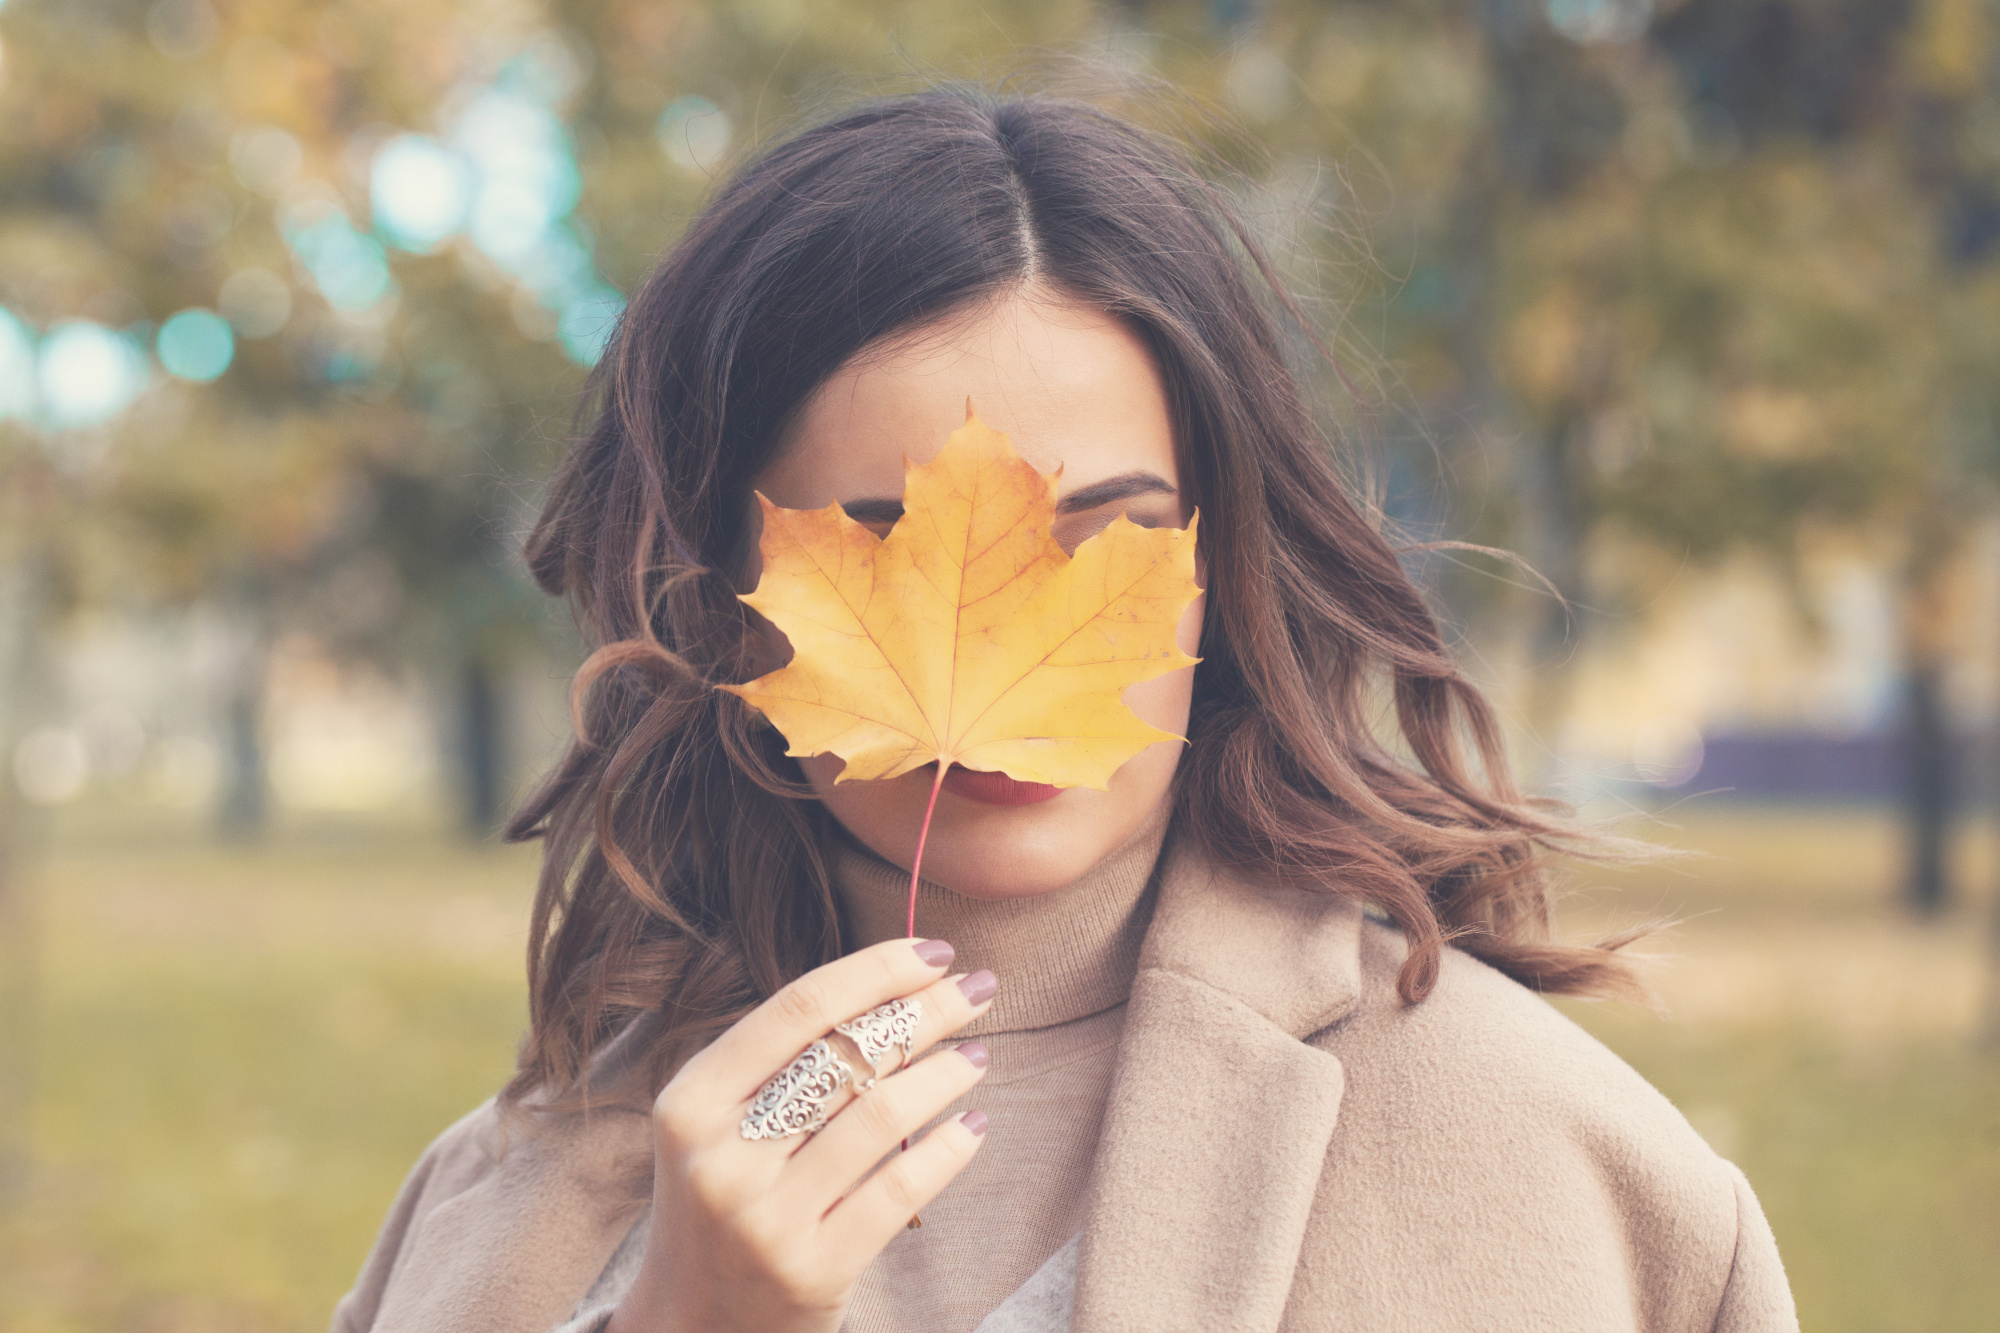 fall makeup, three ways update fall makeup routine, beauty 40+ woman, dark haired women with a leaf covering her face